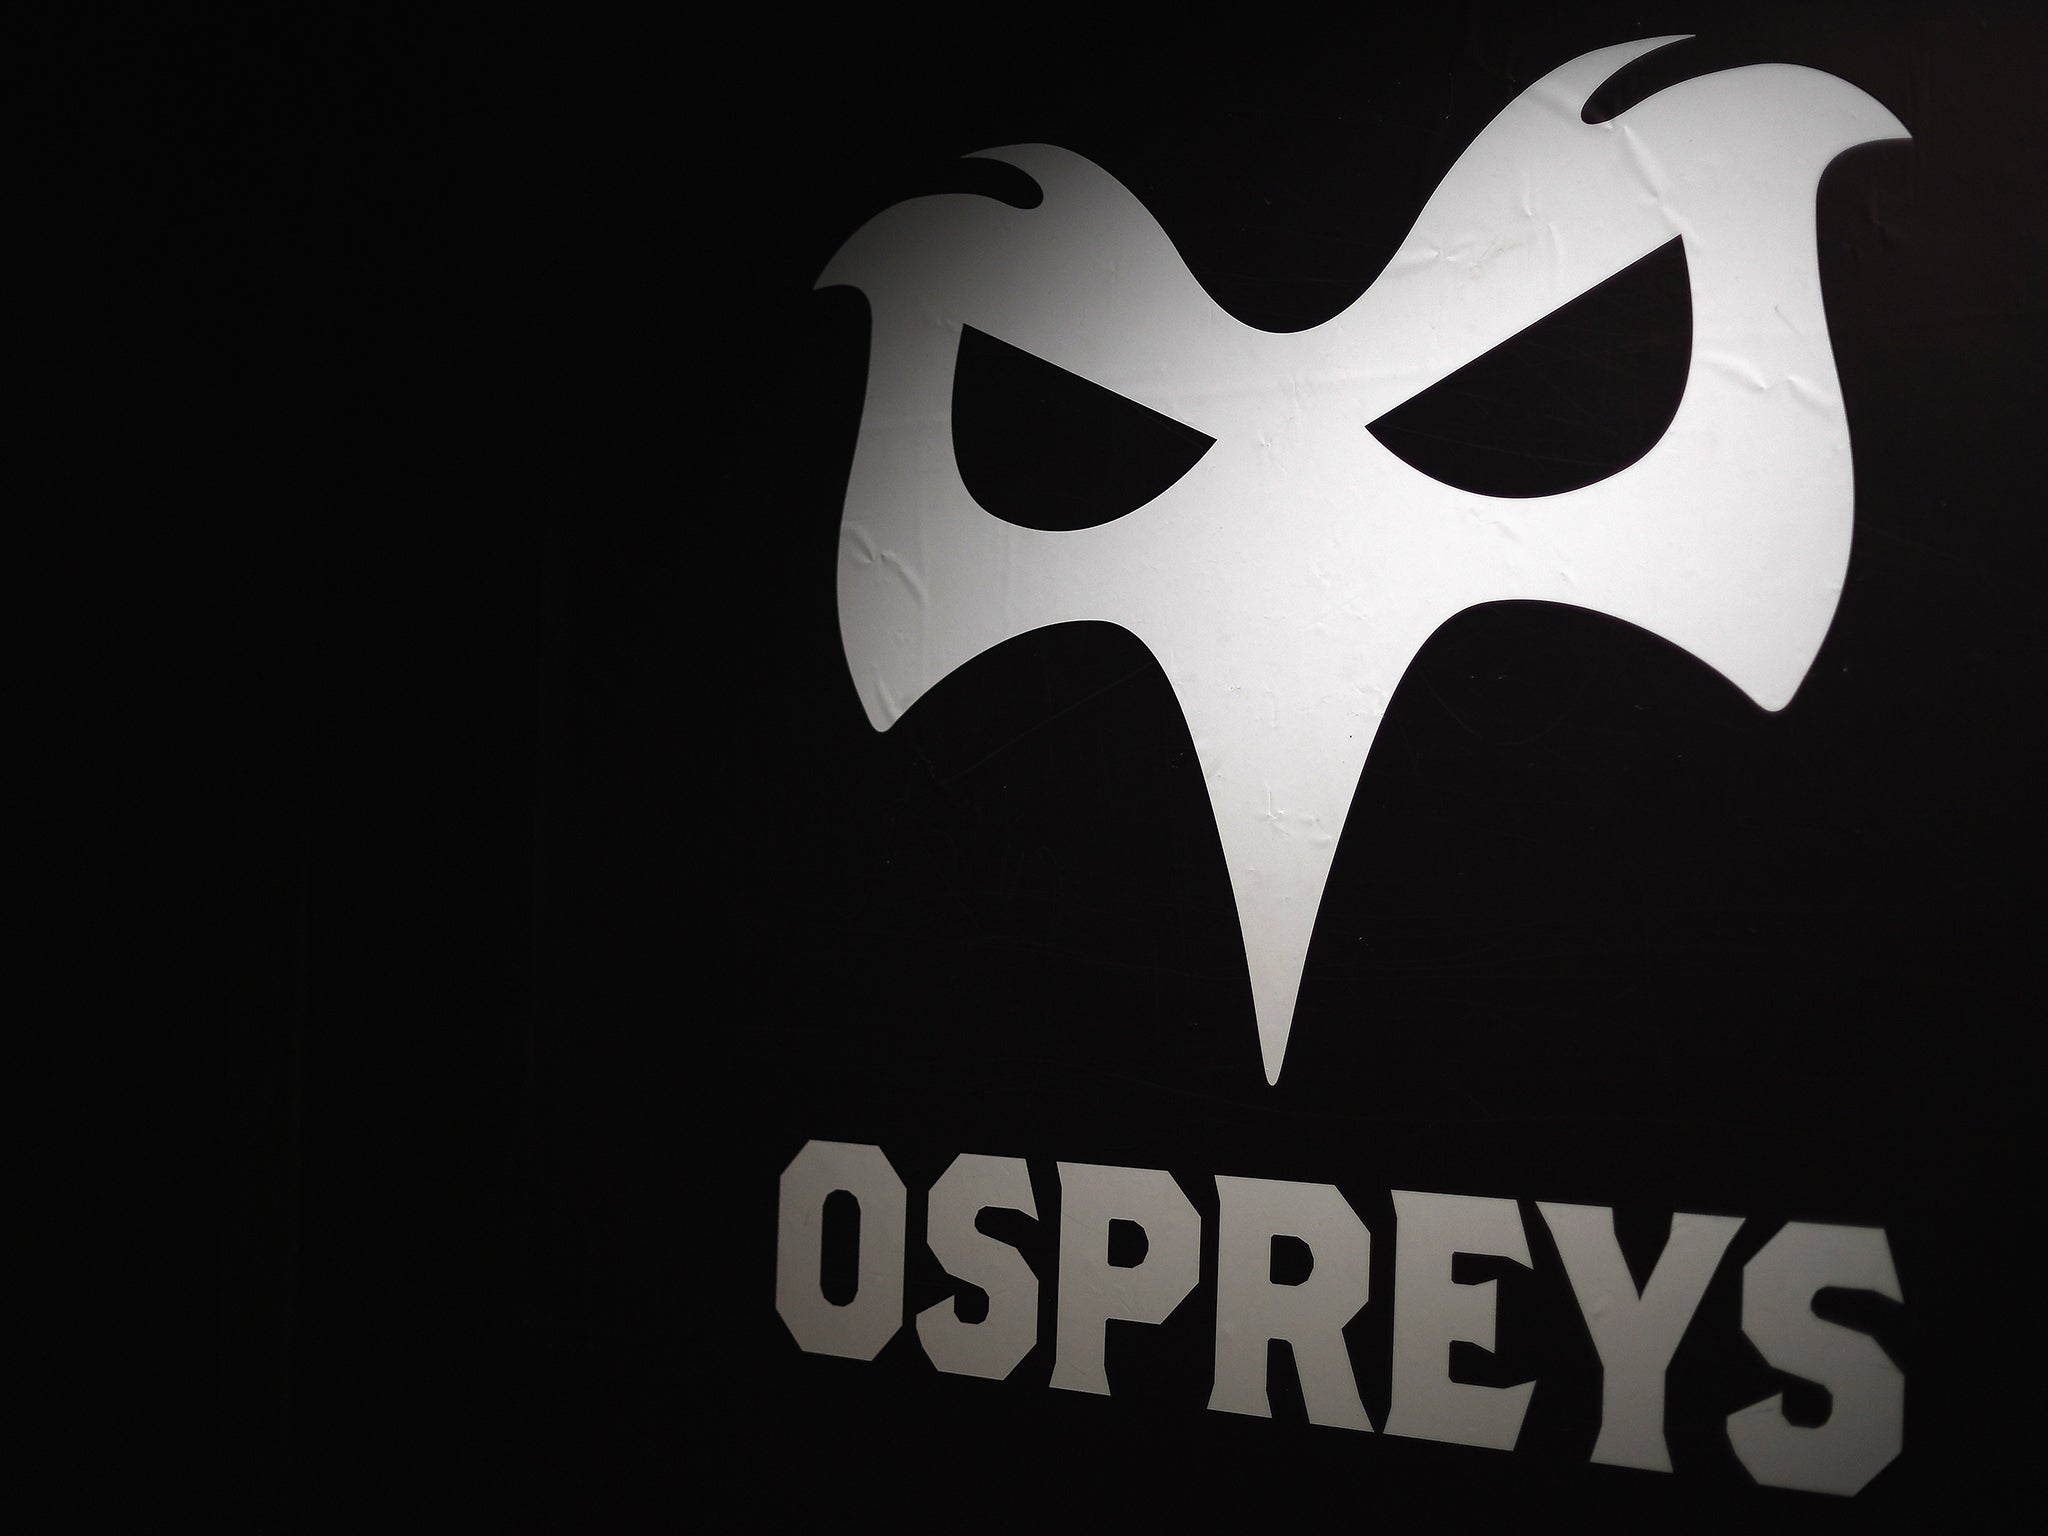 Ospreys have twice pulled out of the agreement with Scarlets